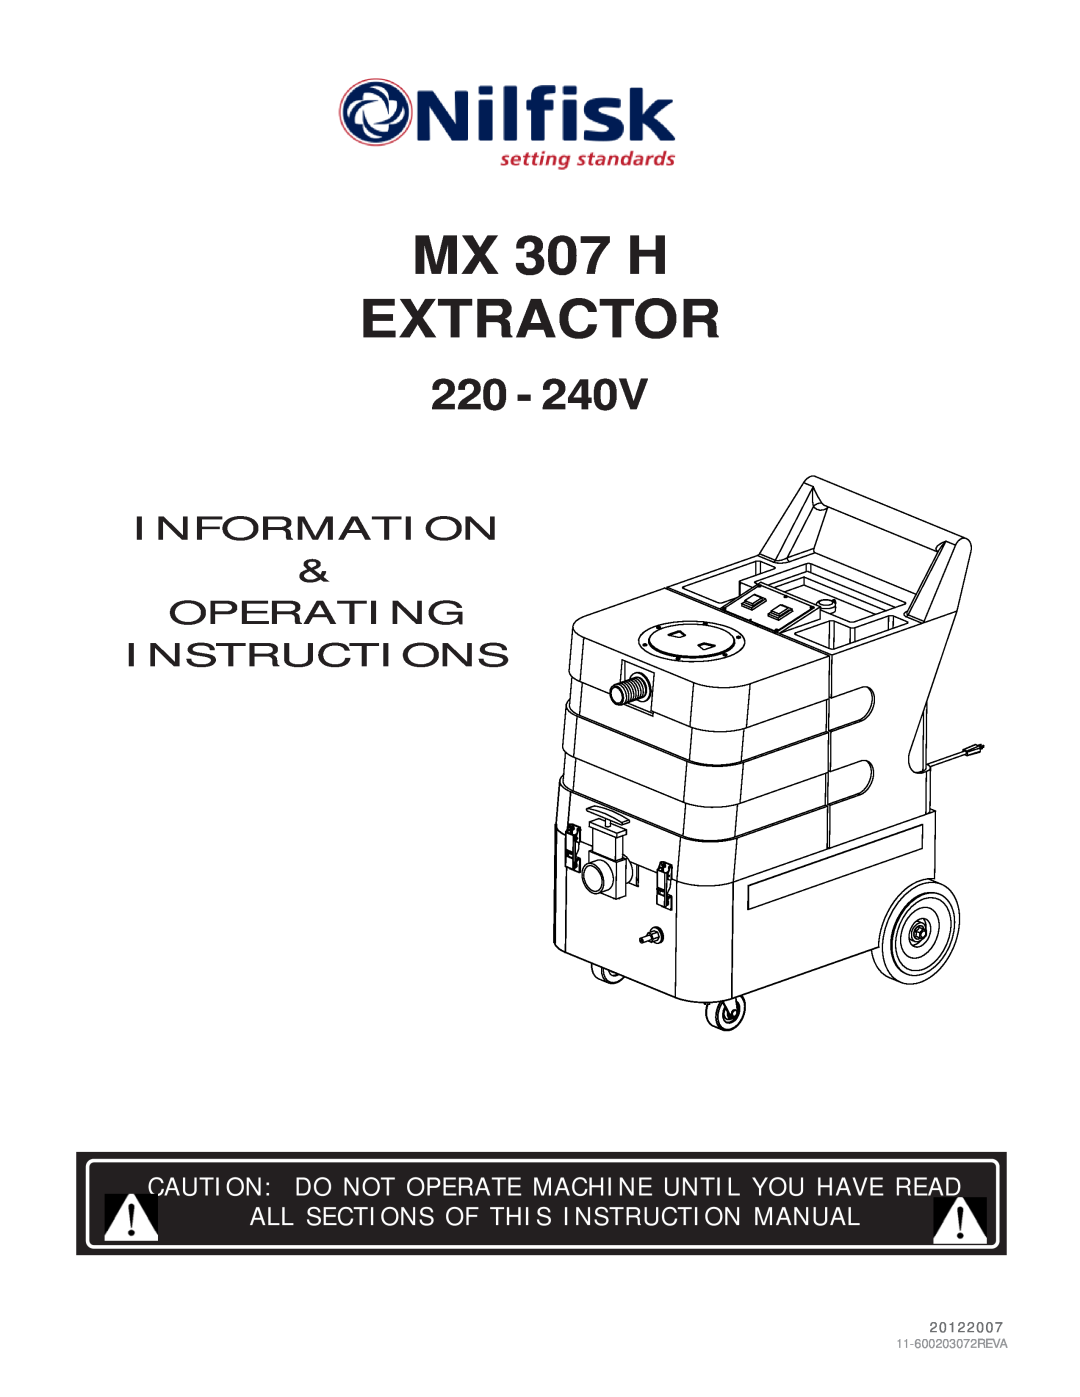 Nilfisk-Advance America instruction manual MX 307 H EXTRACTOR, Information & Operating Instructions, 20122007 